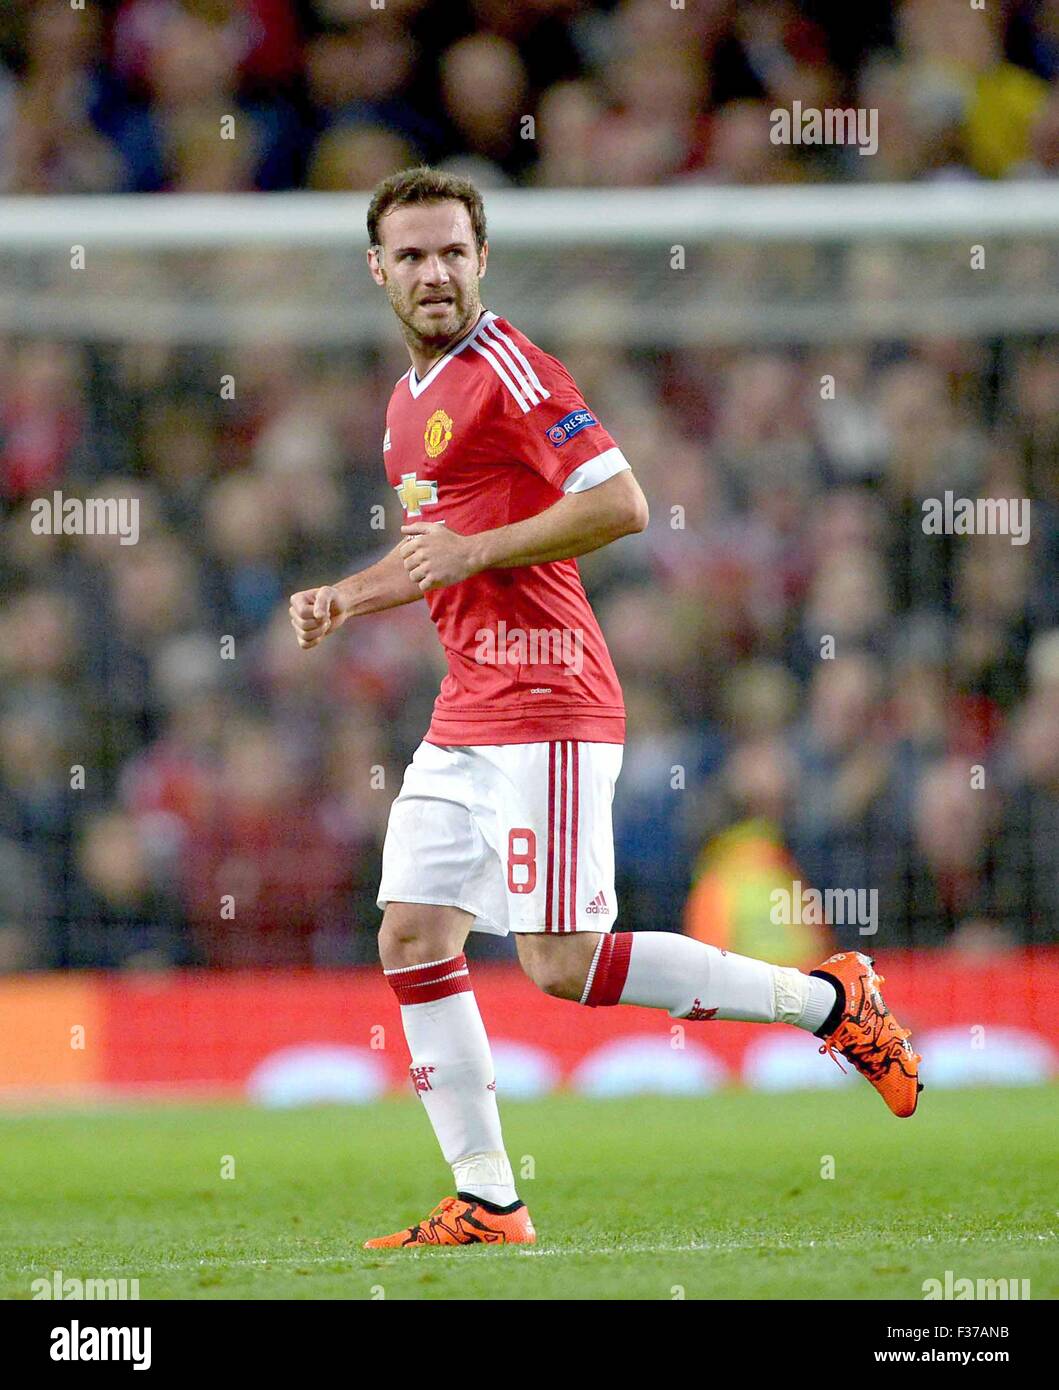 Manchester, Great Britain. 30th Sep, 2015. Manchester United's Juan Manuel Mata celebrates his 1-1 equaliser during the UEFA Champions League Group B first leg soccer match between Manchester United and VfL Wolfsburg at the Old Trafford in Manchester, Great Britain, 30 September 2015. Photo: Peter Steffen/dpa/Alamy Live News Stock Photo